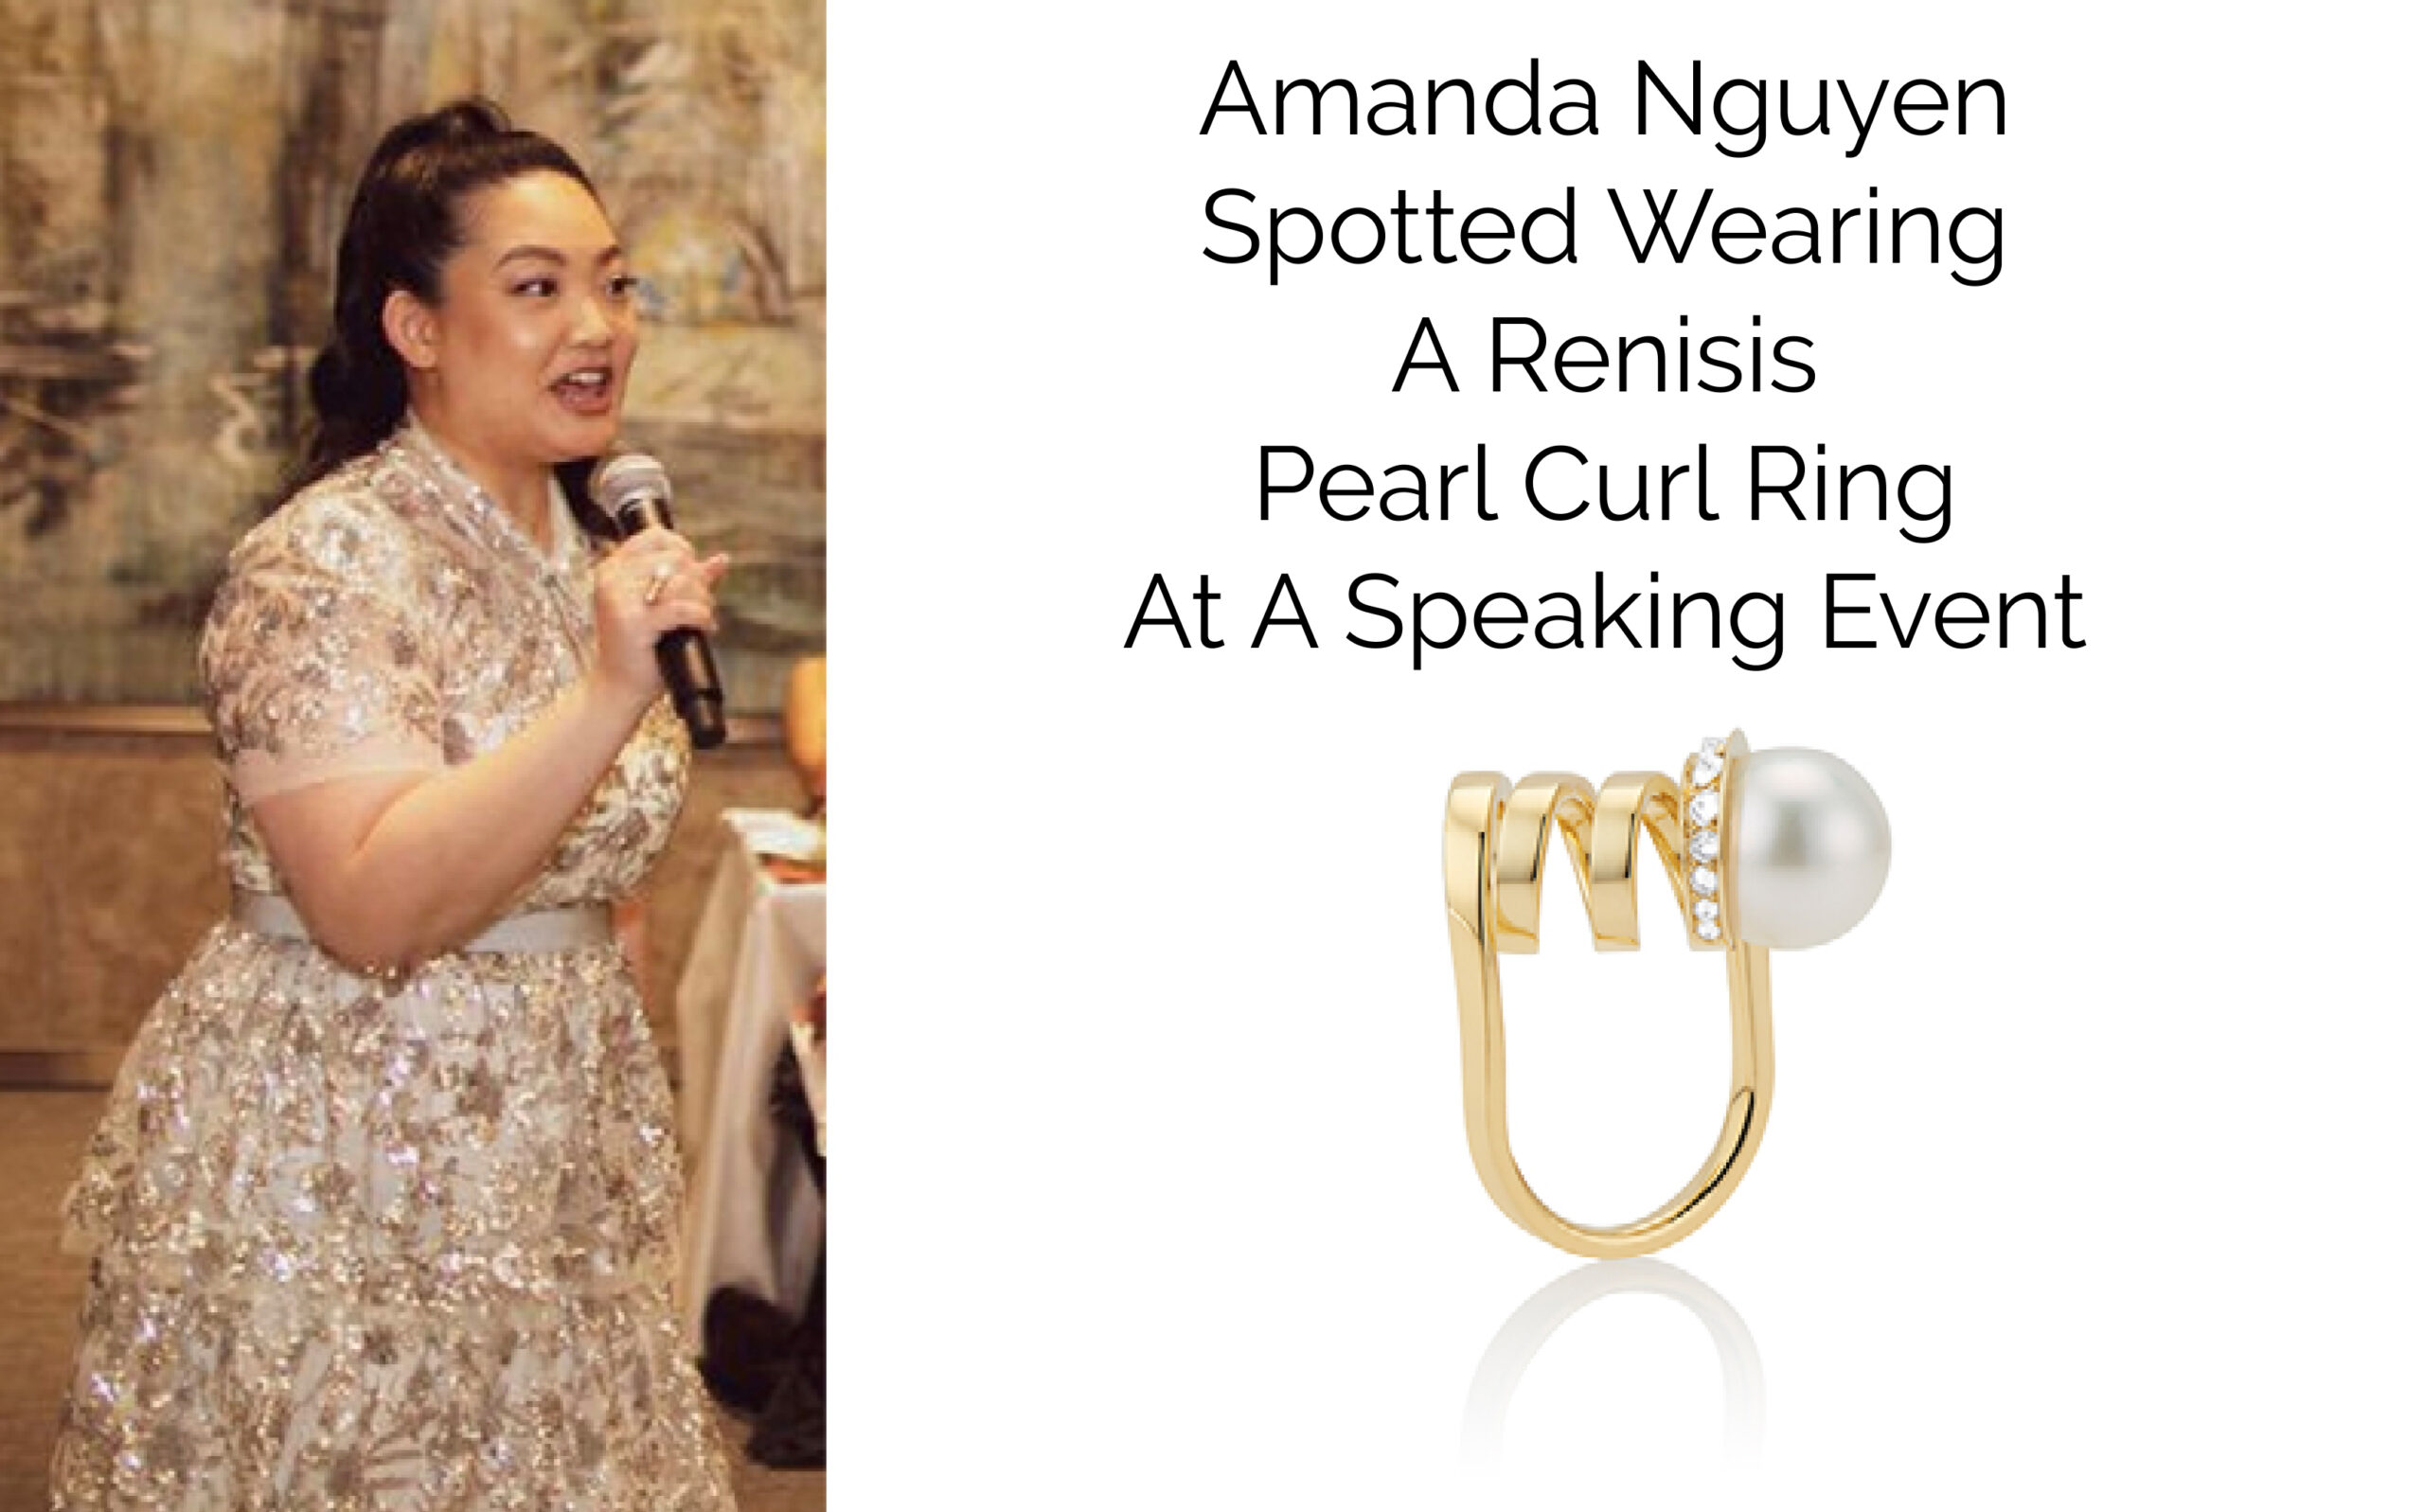 This is a picture featuring Amanda Nguyen spotted wearing a Renisis Pearl Curl Ring at a speaking event.